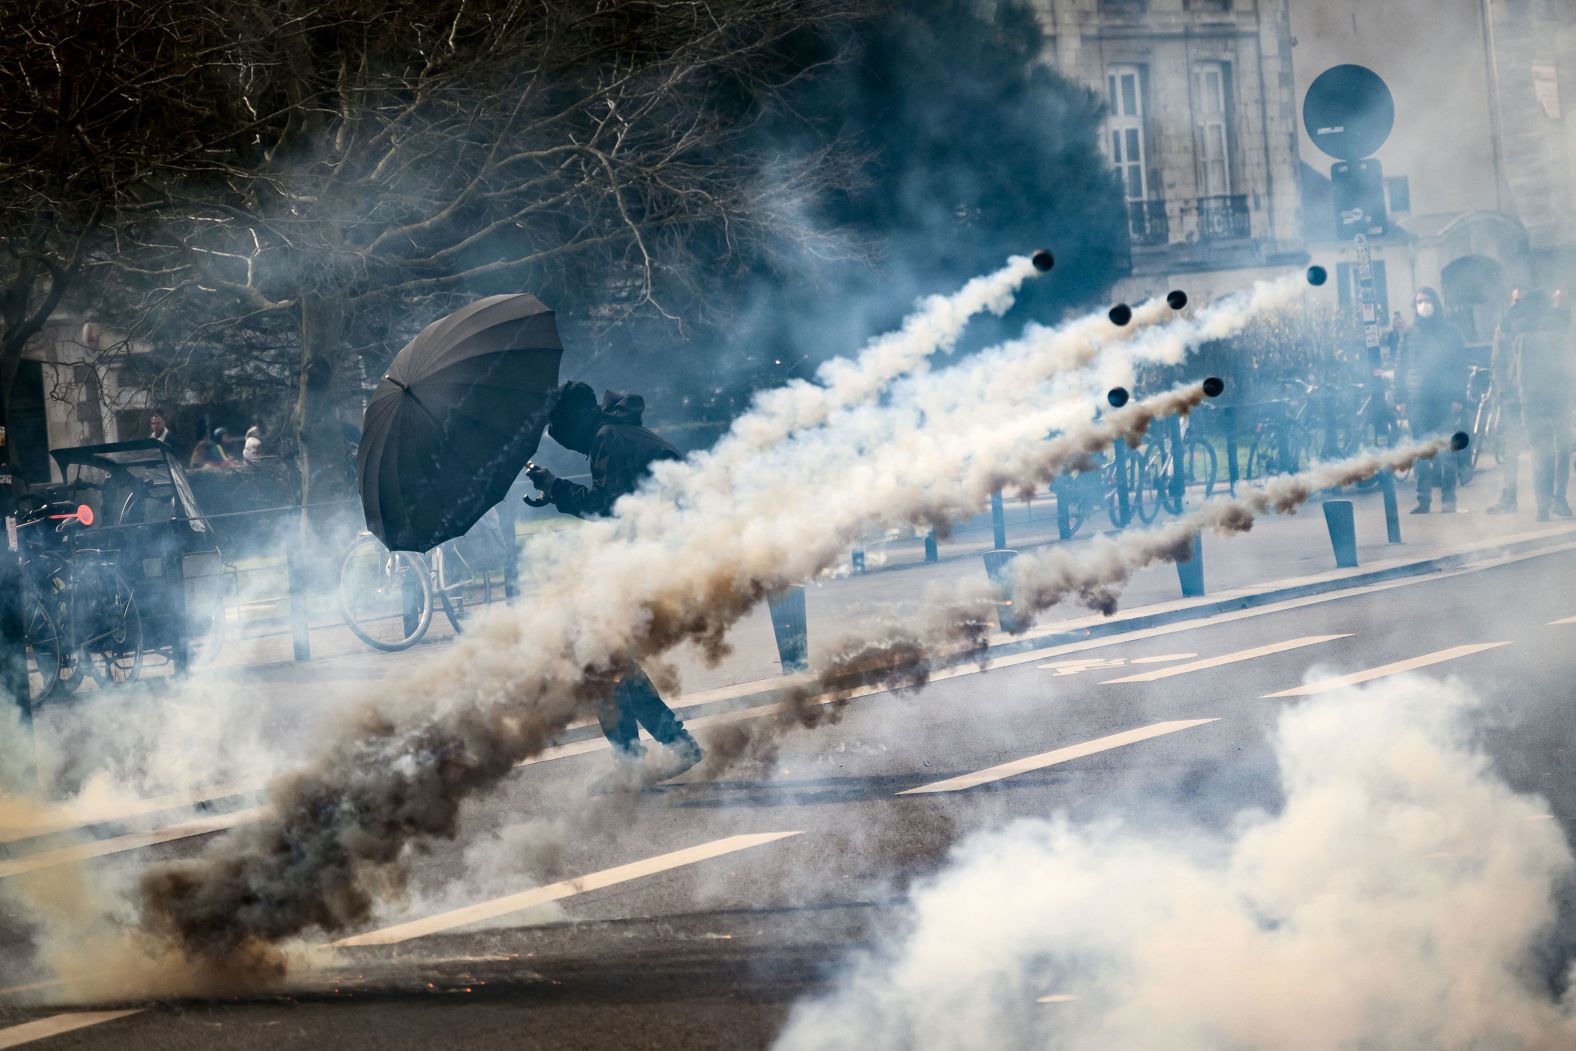 A demonstrator holds an umbrella to protect themselves from tear gas during a protest in Nantes, France, on Wednesday, March 15. Protesters have been taking action against the government's <a href="index.php?page=&url=https%3A%2F%2Fwww.cnn.com%2F2023%2F03%2F16%2Feurope%2Ffrance-pension-reform-strikes-intl%2Findex.html" target="_blank">proposed pension reforms</a>.